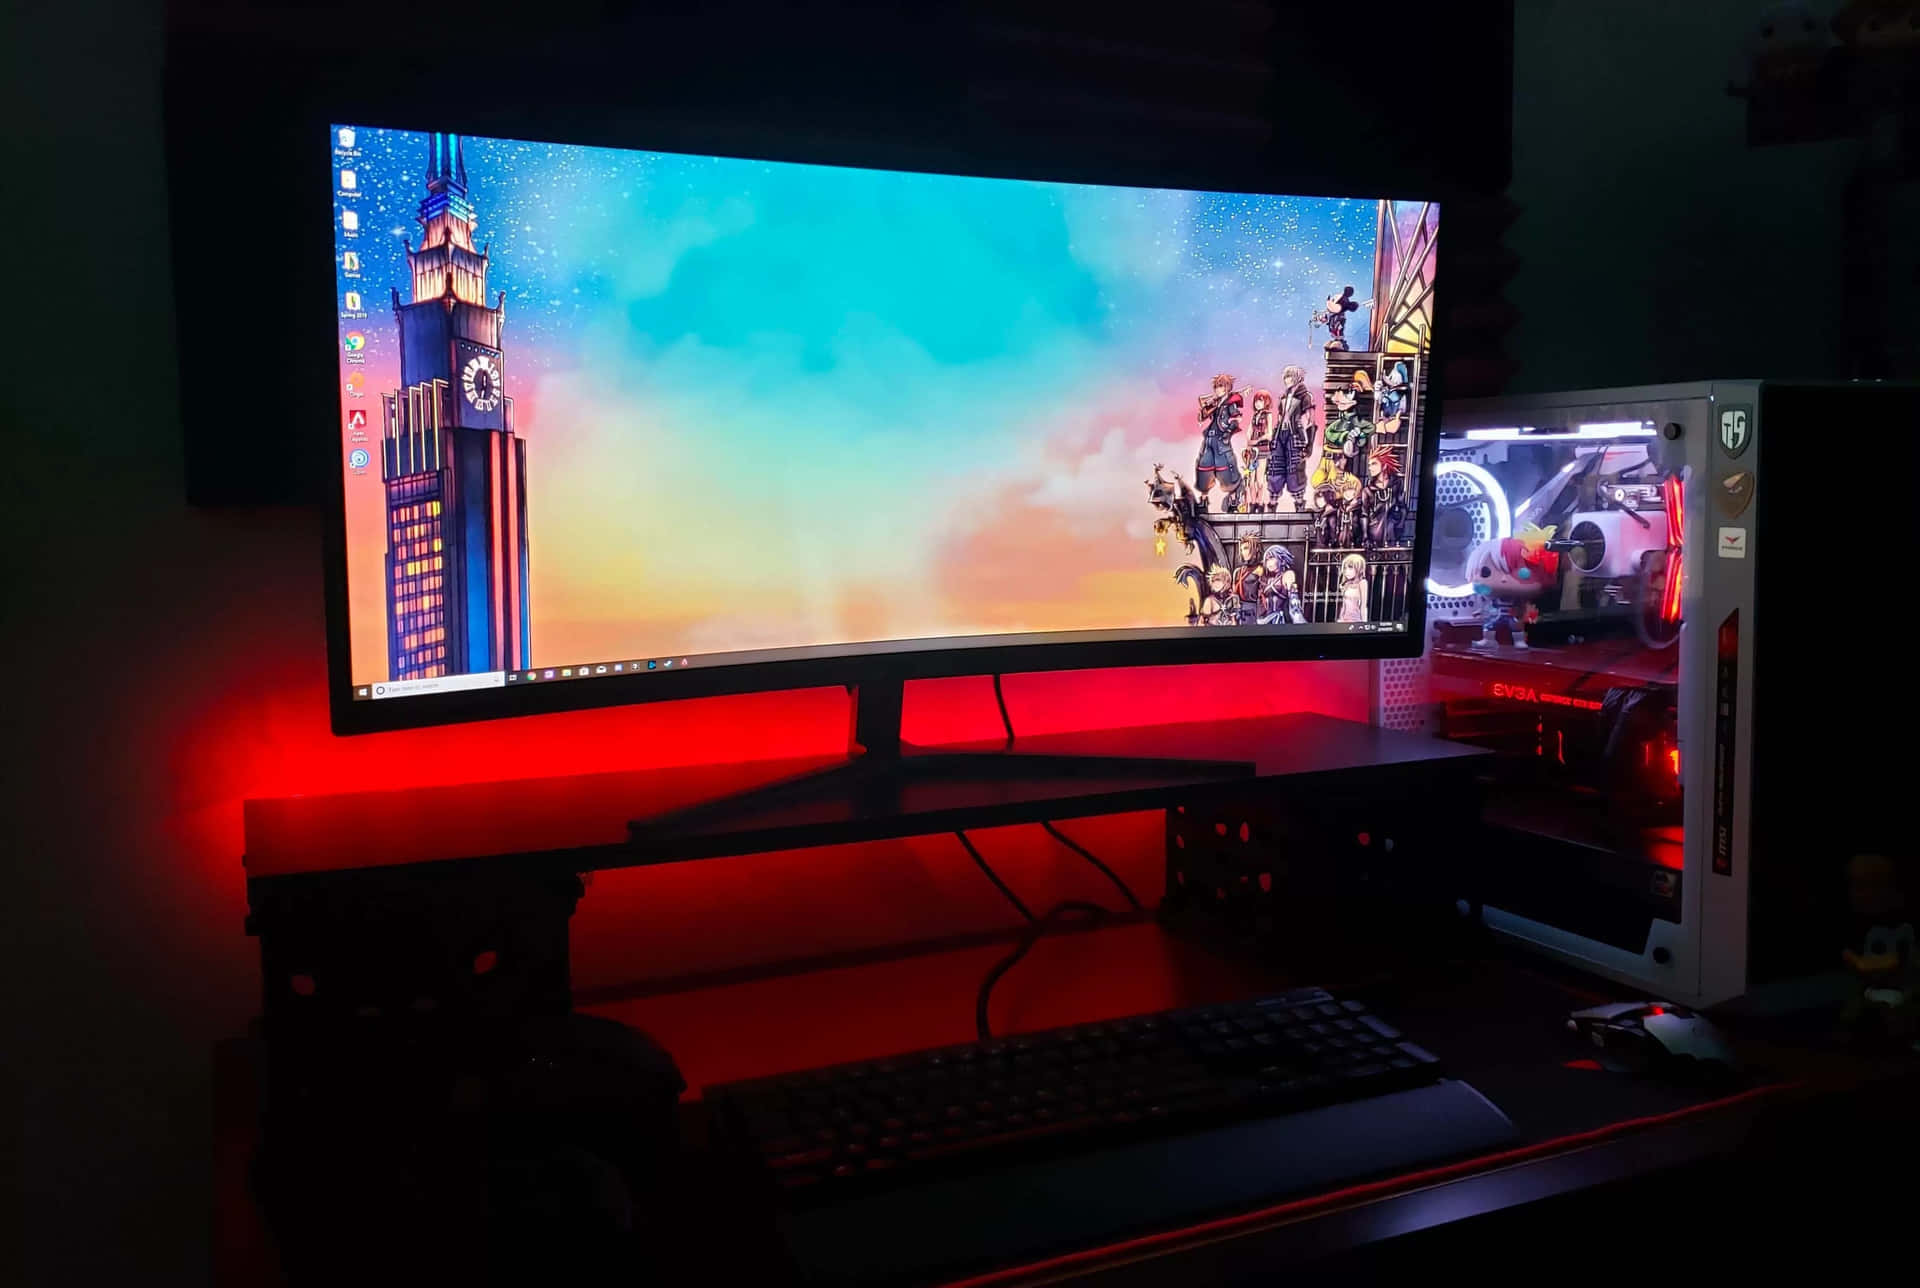 Level up with the Optimal Gaming Monitor Wallpaper